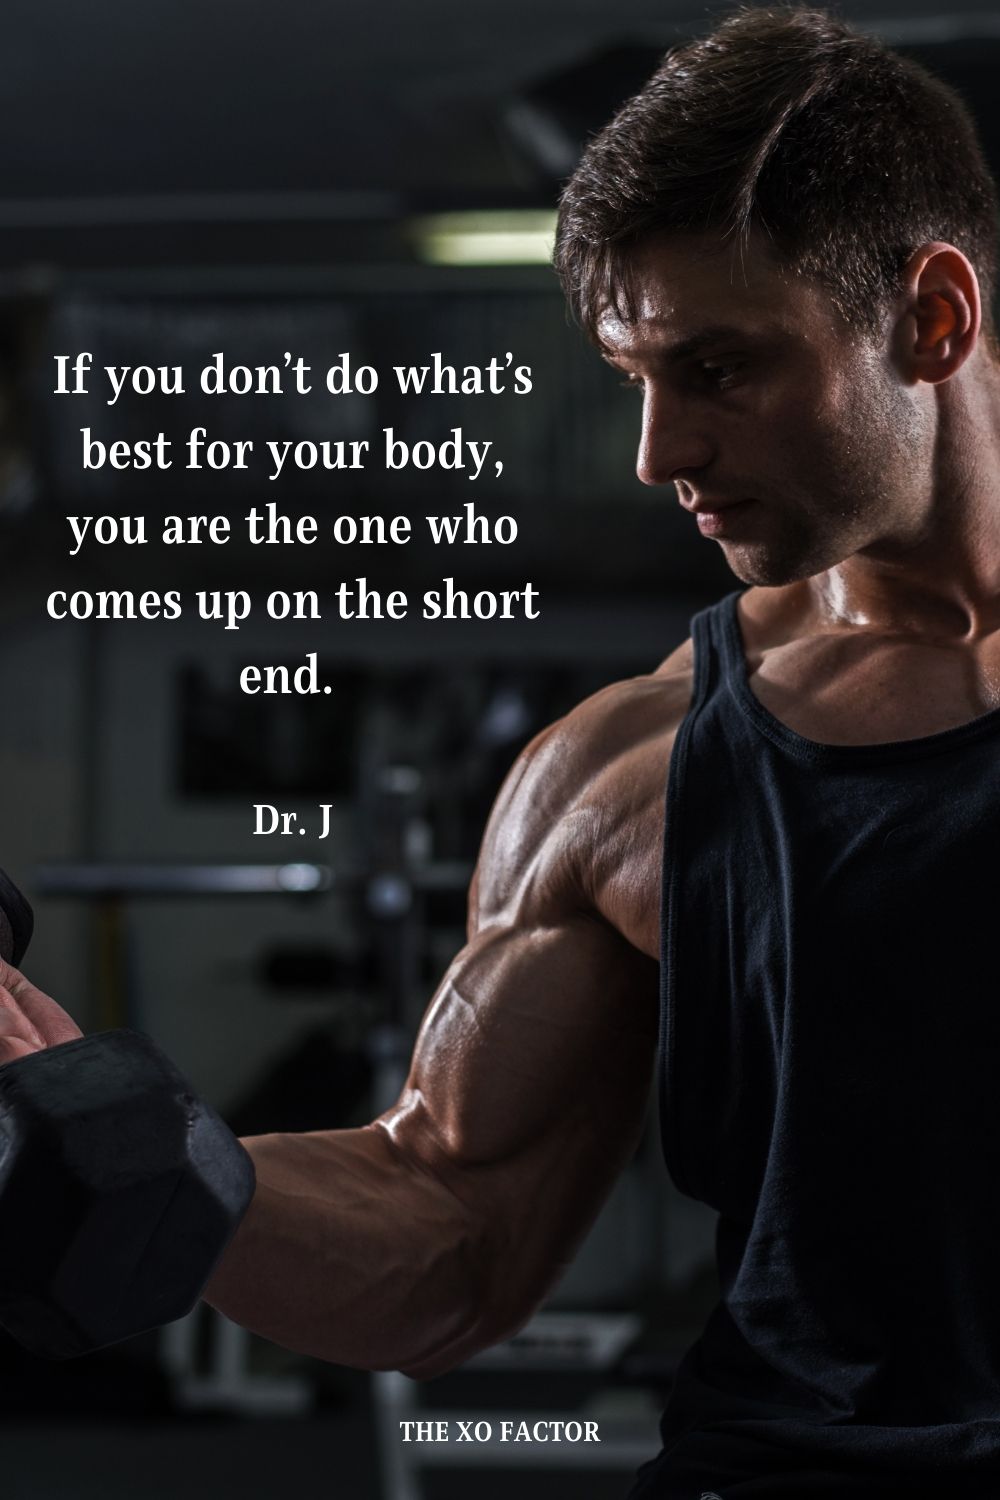 If you don’t do what’s best for your body, you are the one who comes up on the short end.  Dr. J